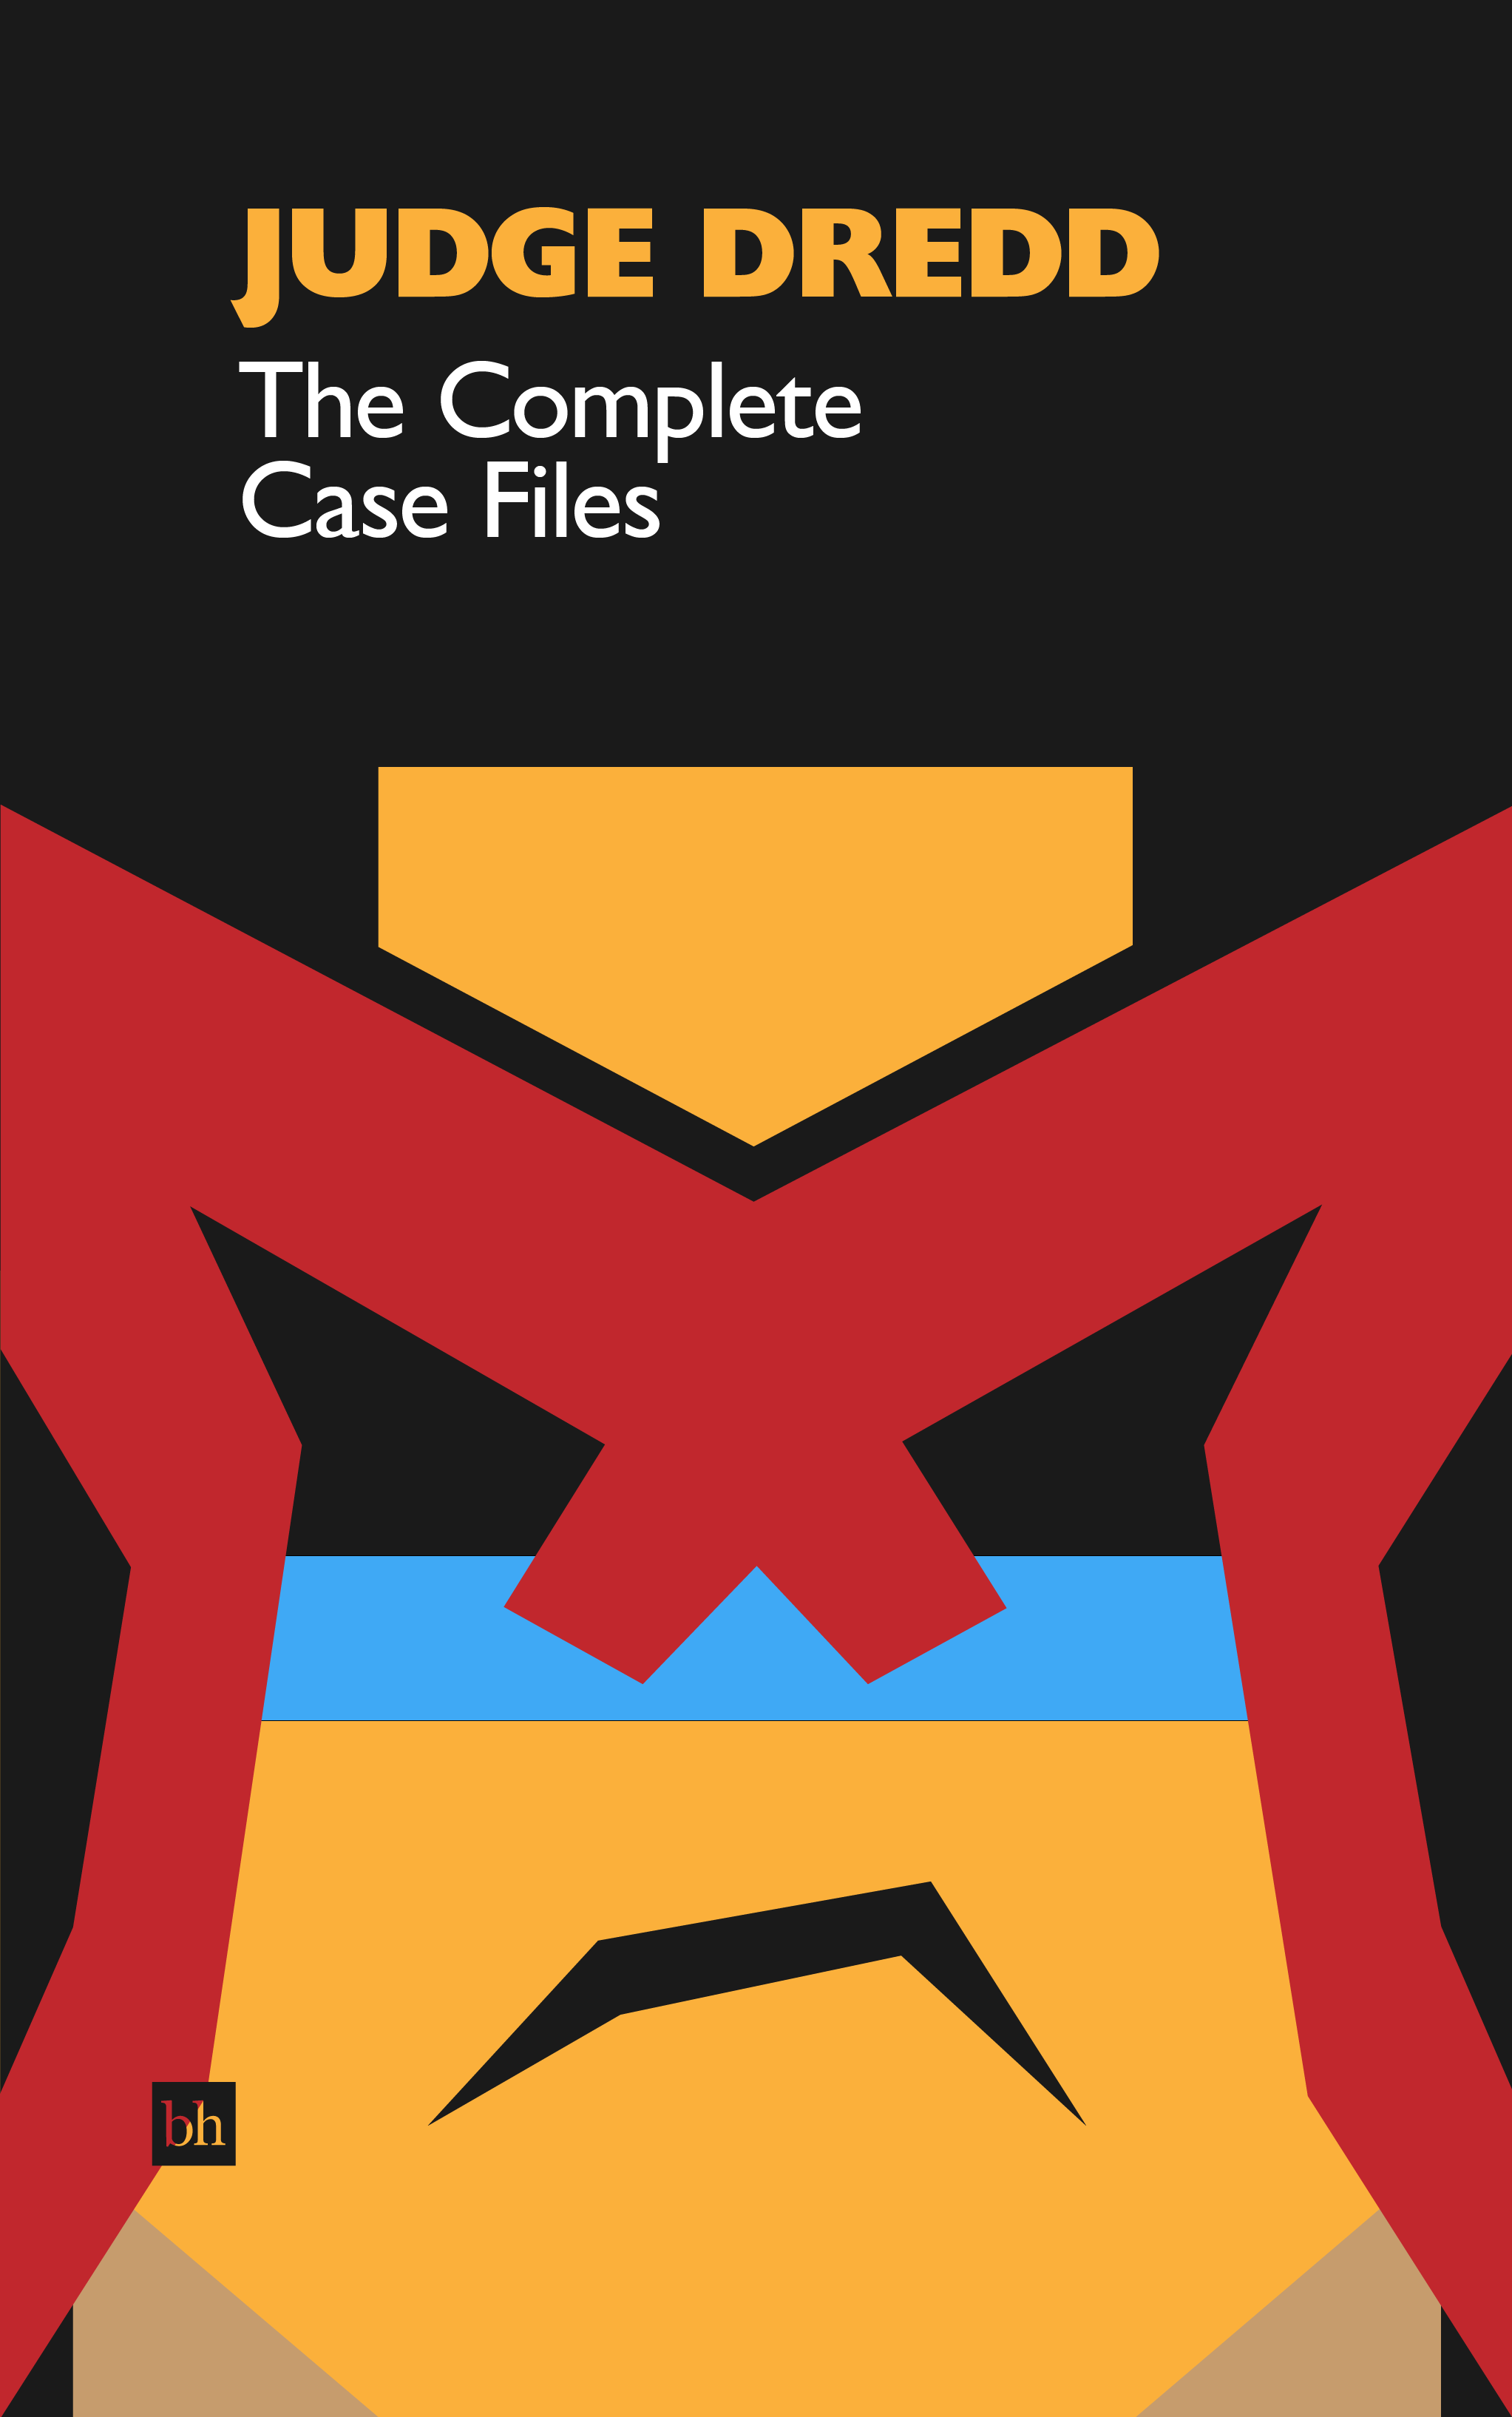 Judge Dredd: The Complete Case Files by John Wagner